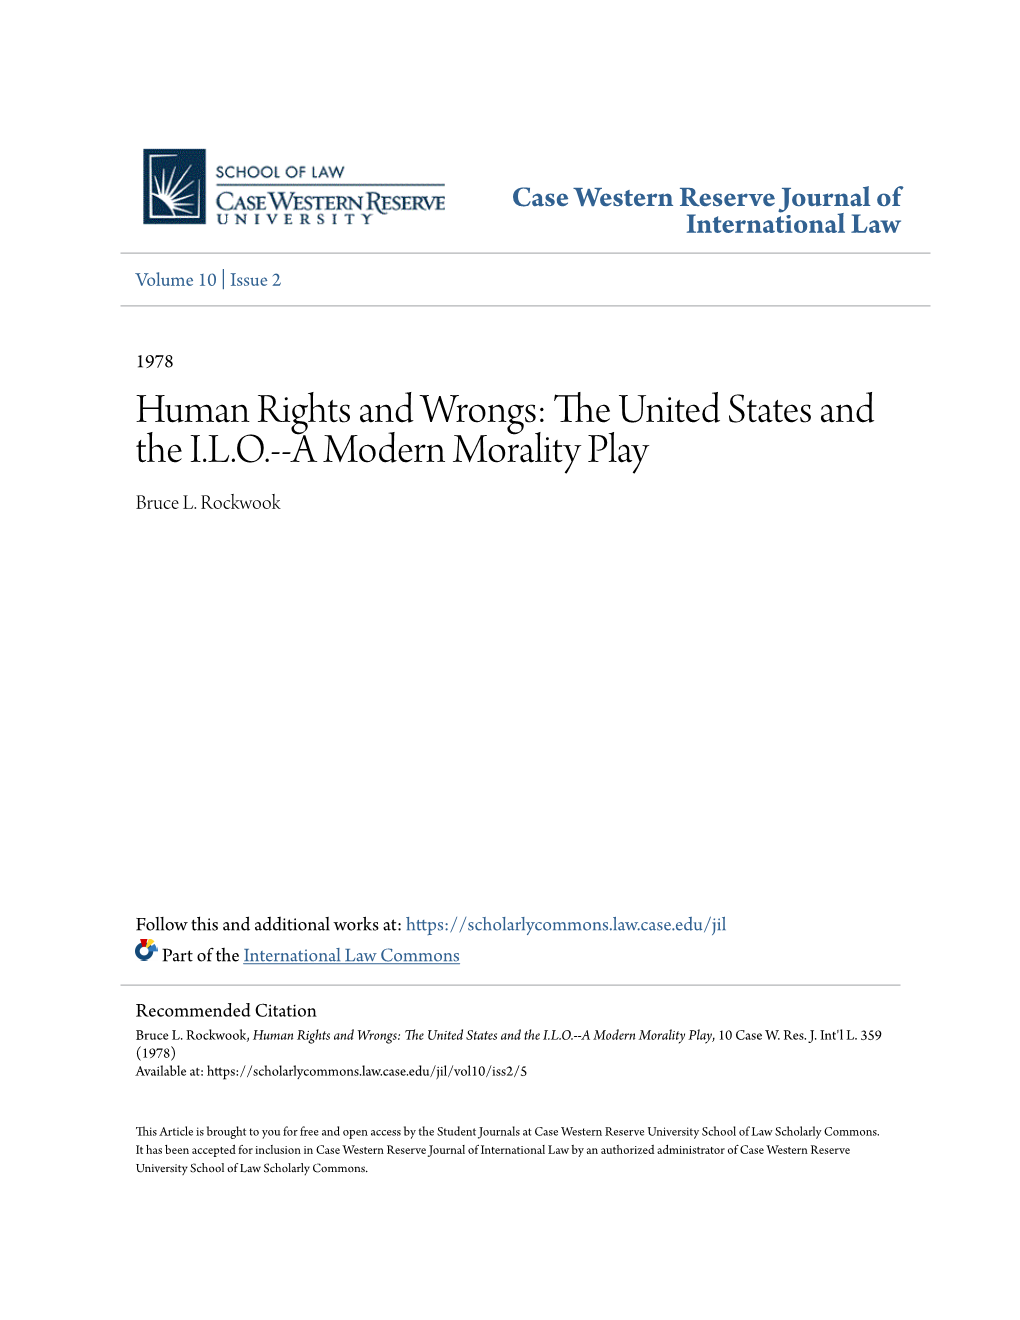 Human Rights and Wrongs: the United States and the I.L.O.--A Modern Morality Play, 10 Case W